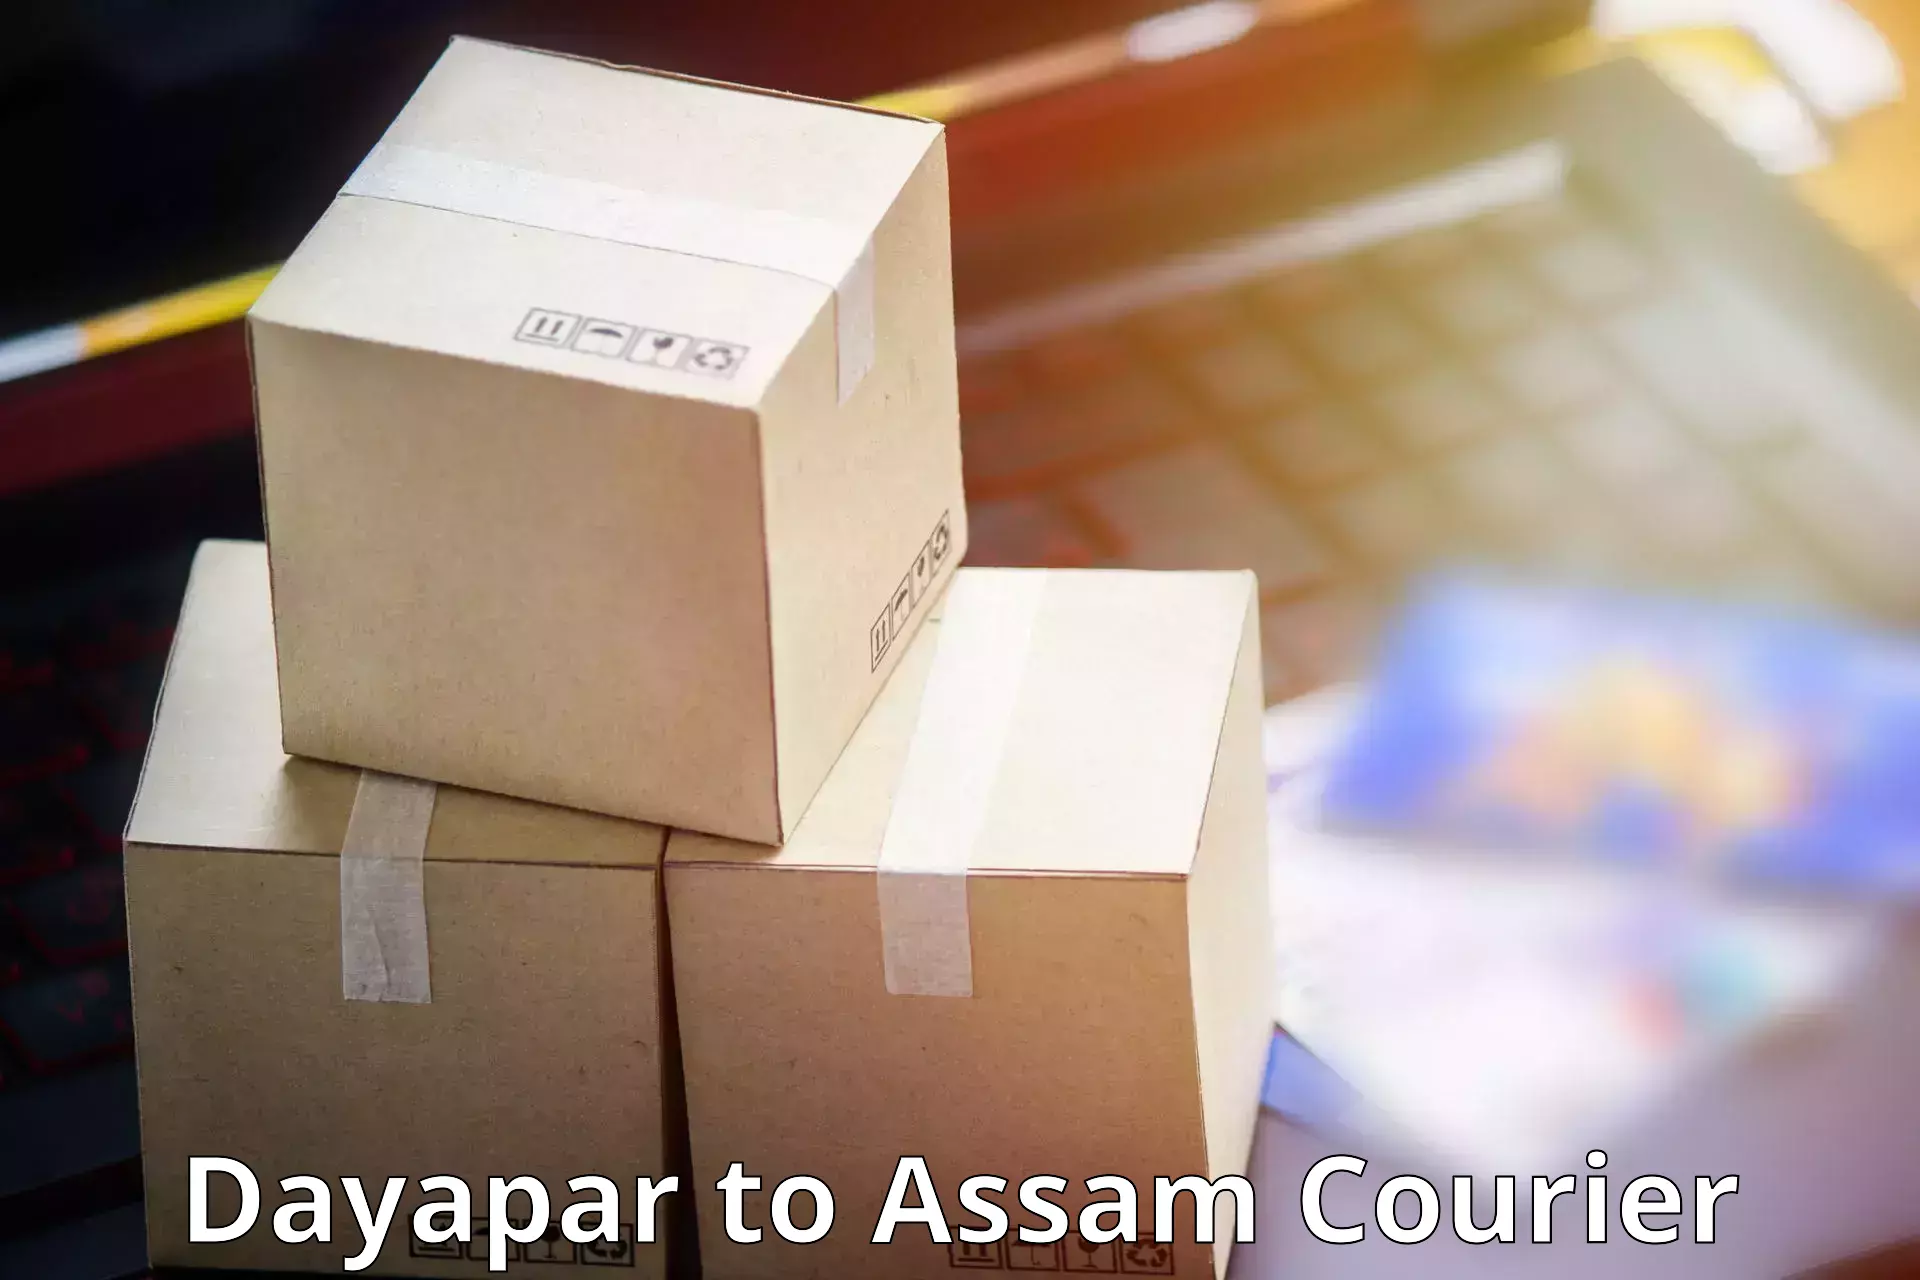 Rural area delivery in Dayapar to Assam